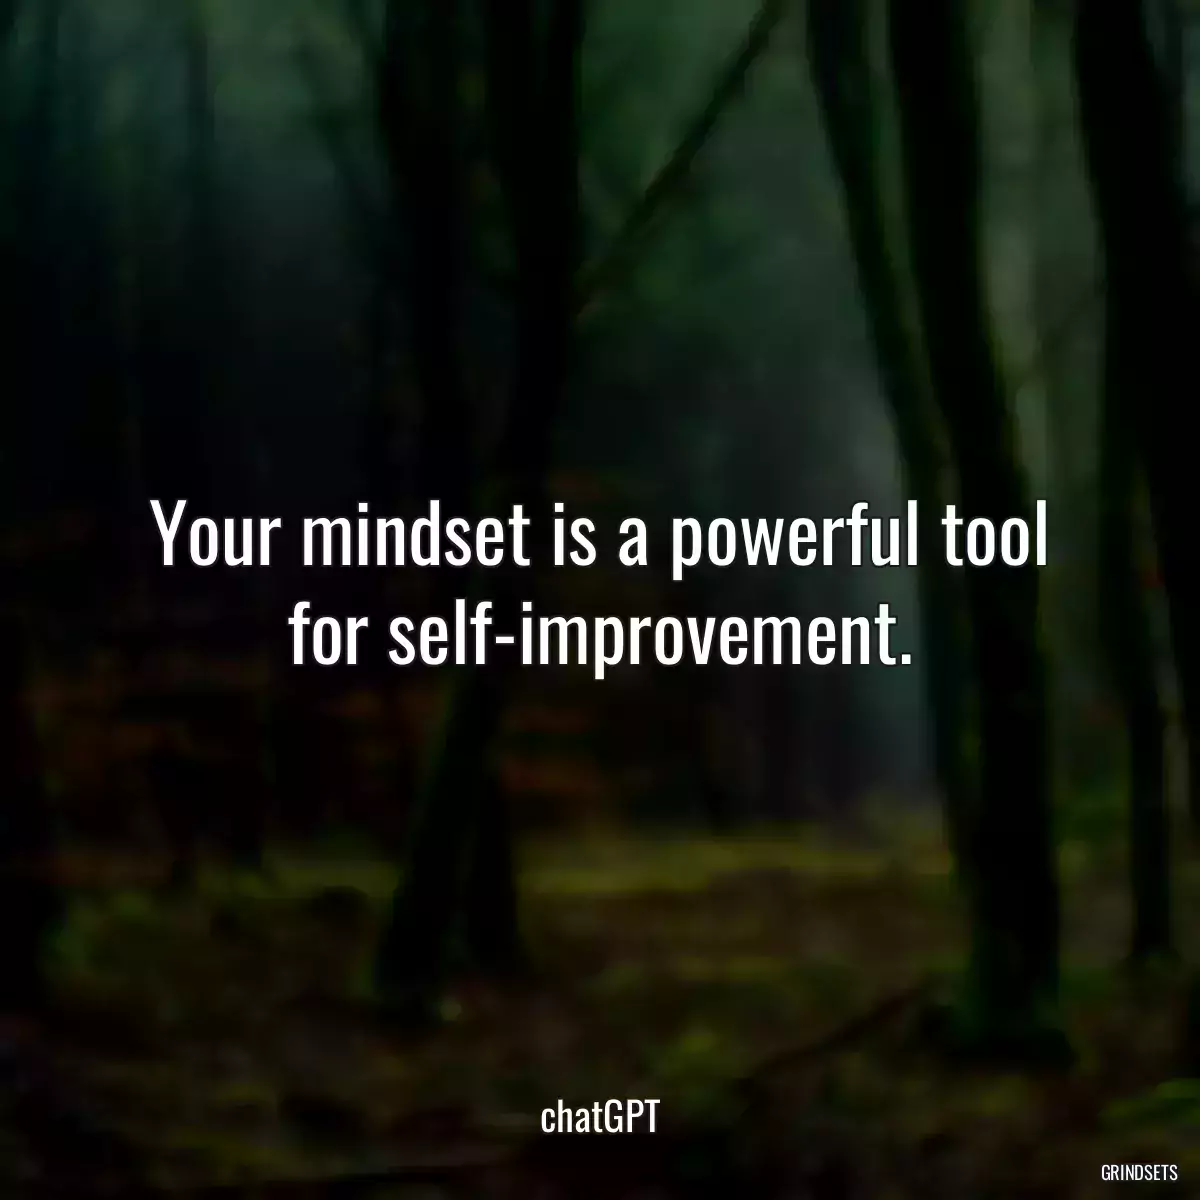 Your mindset is a powerful tool for self-improvement.